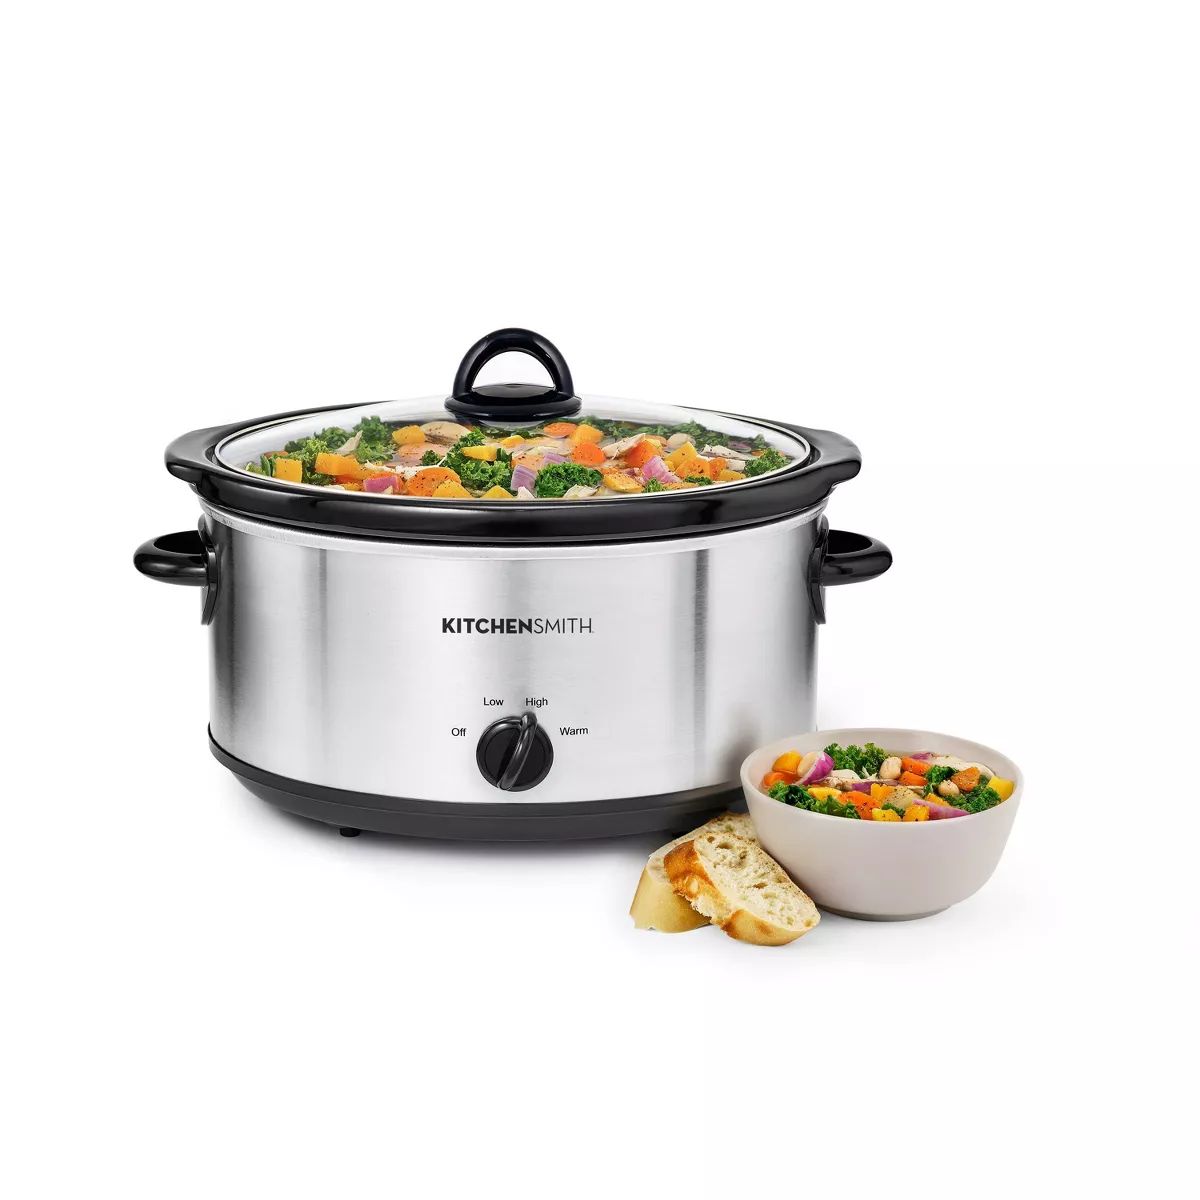 KitchenSmith by Bella 6qt Manual Slow Cooker - Stainless Steel | Target